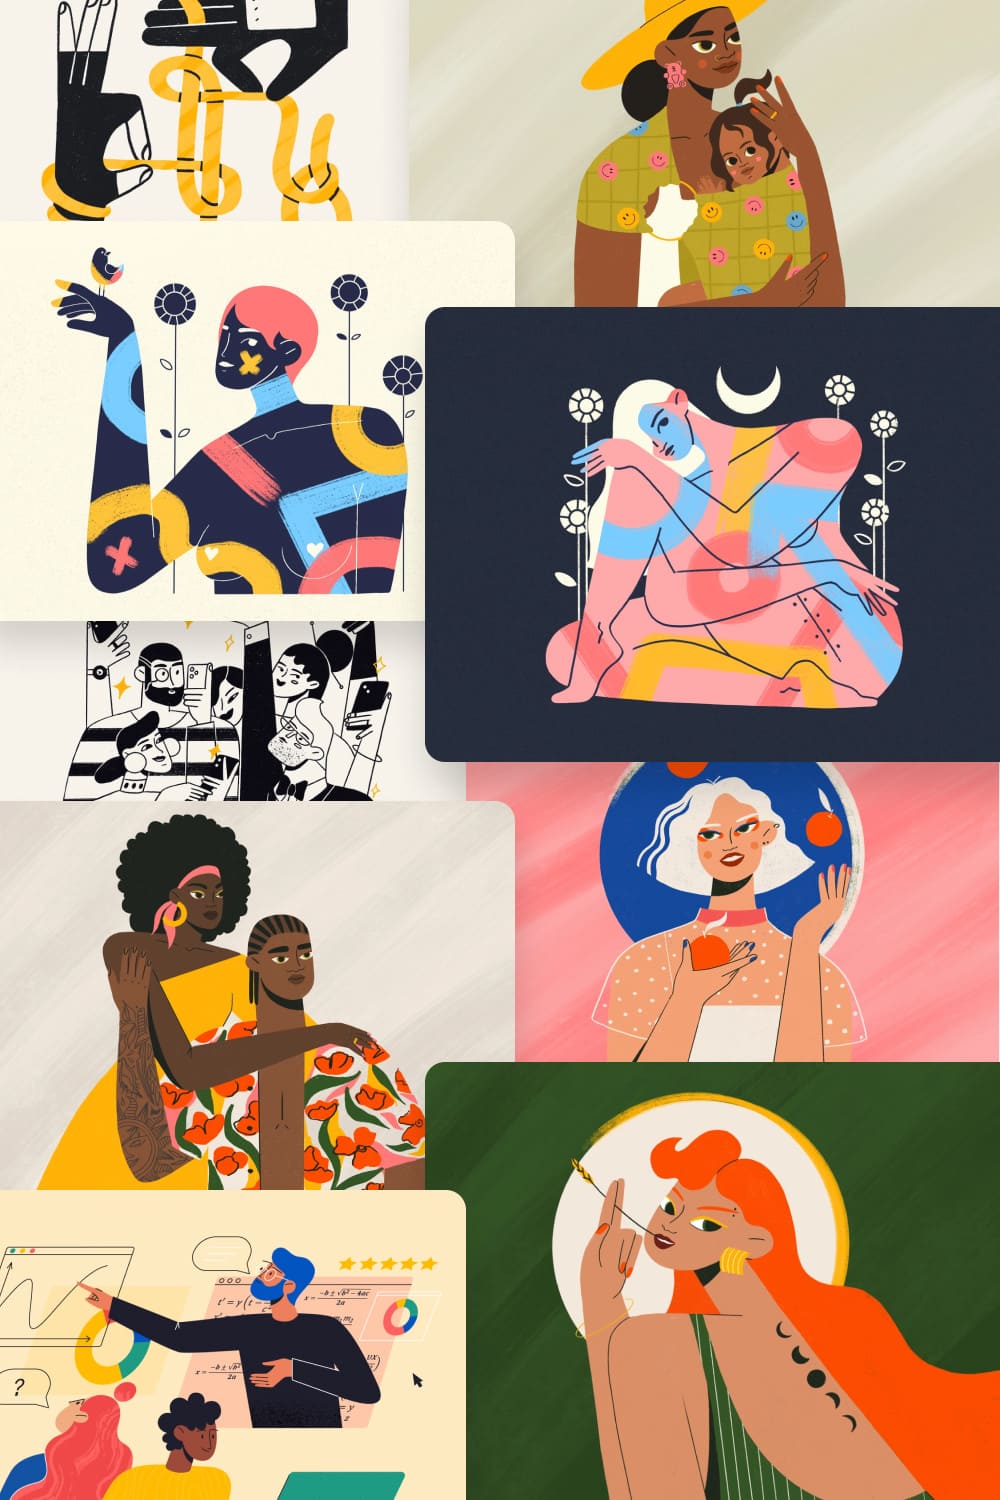 These are very stylish illustrations of people in bright colors.